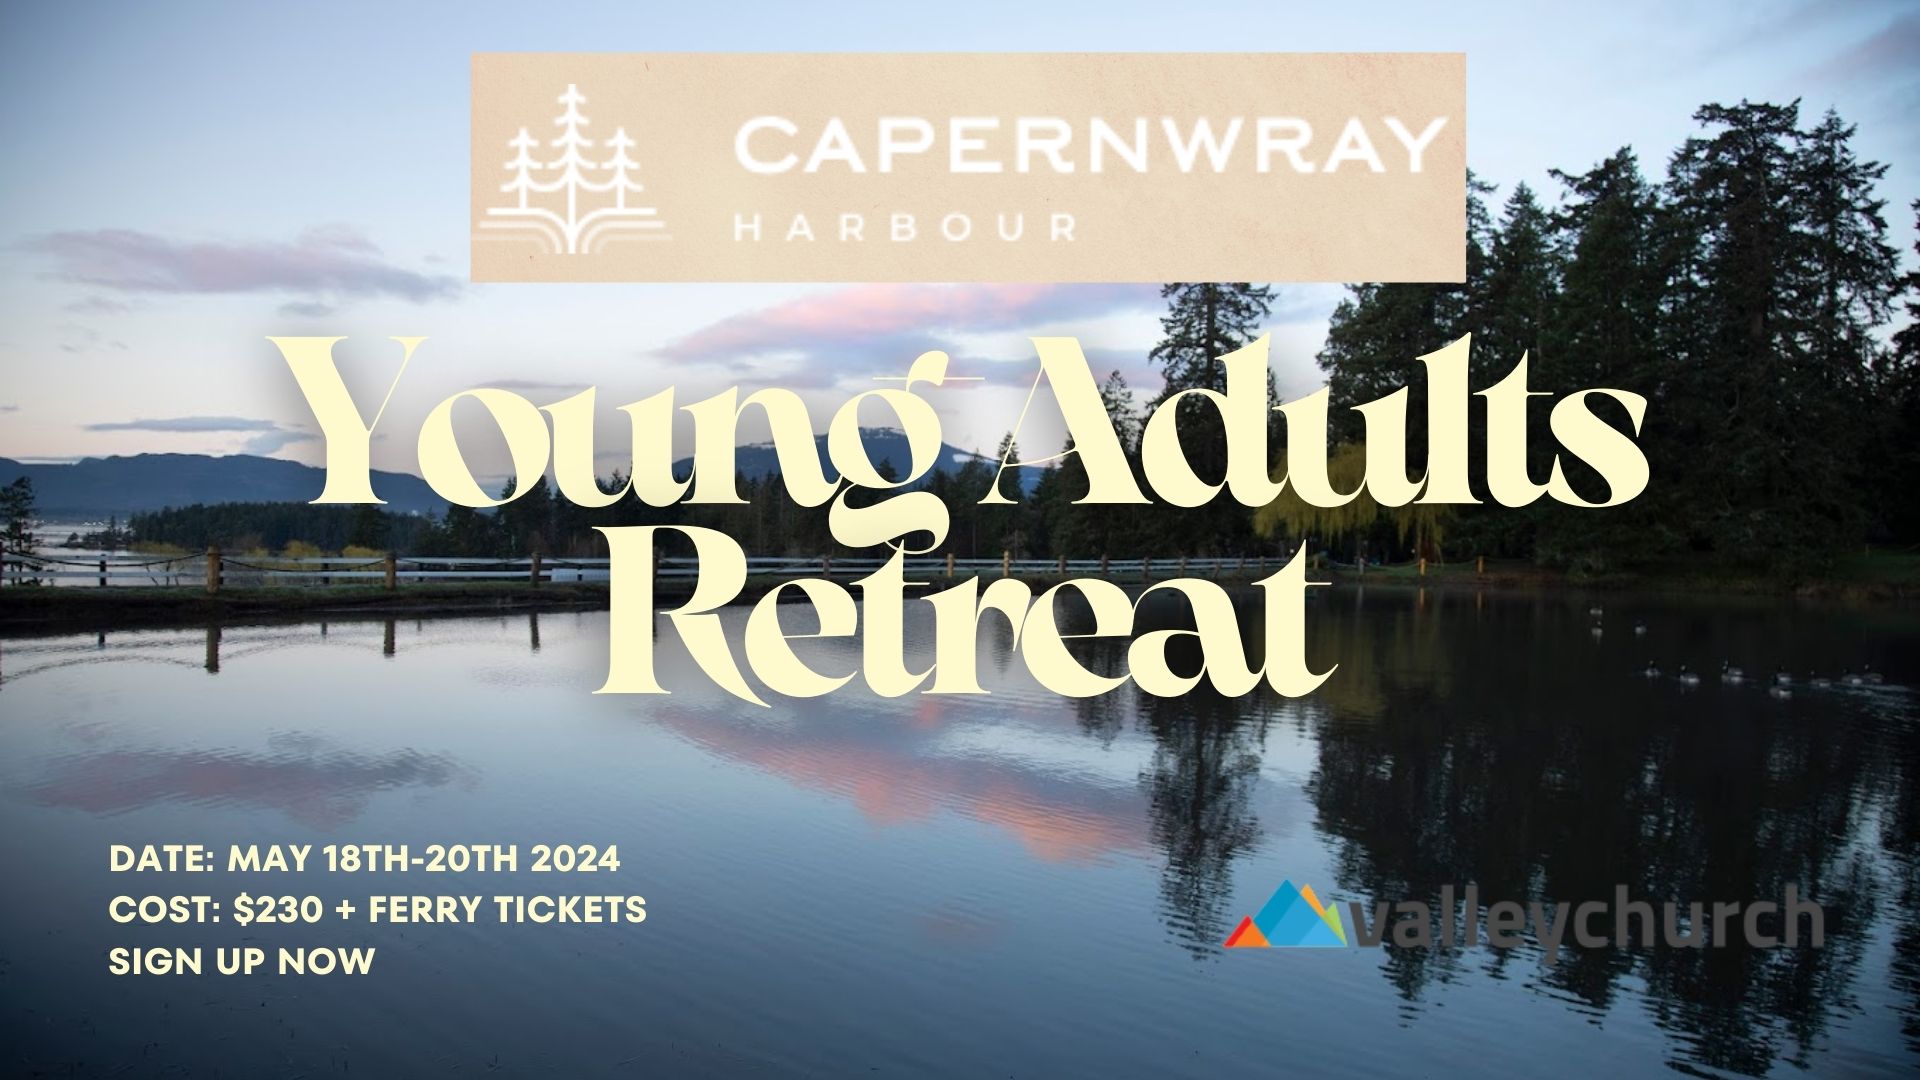 Young Adult's Capernwray Retreat